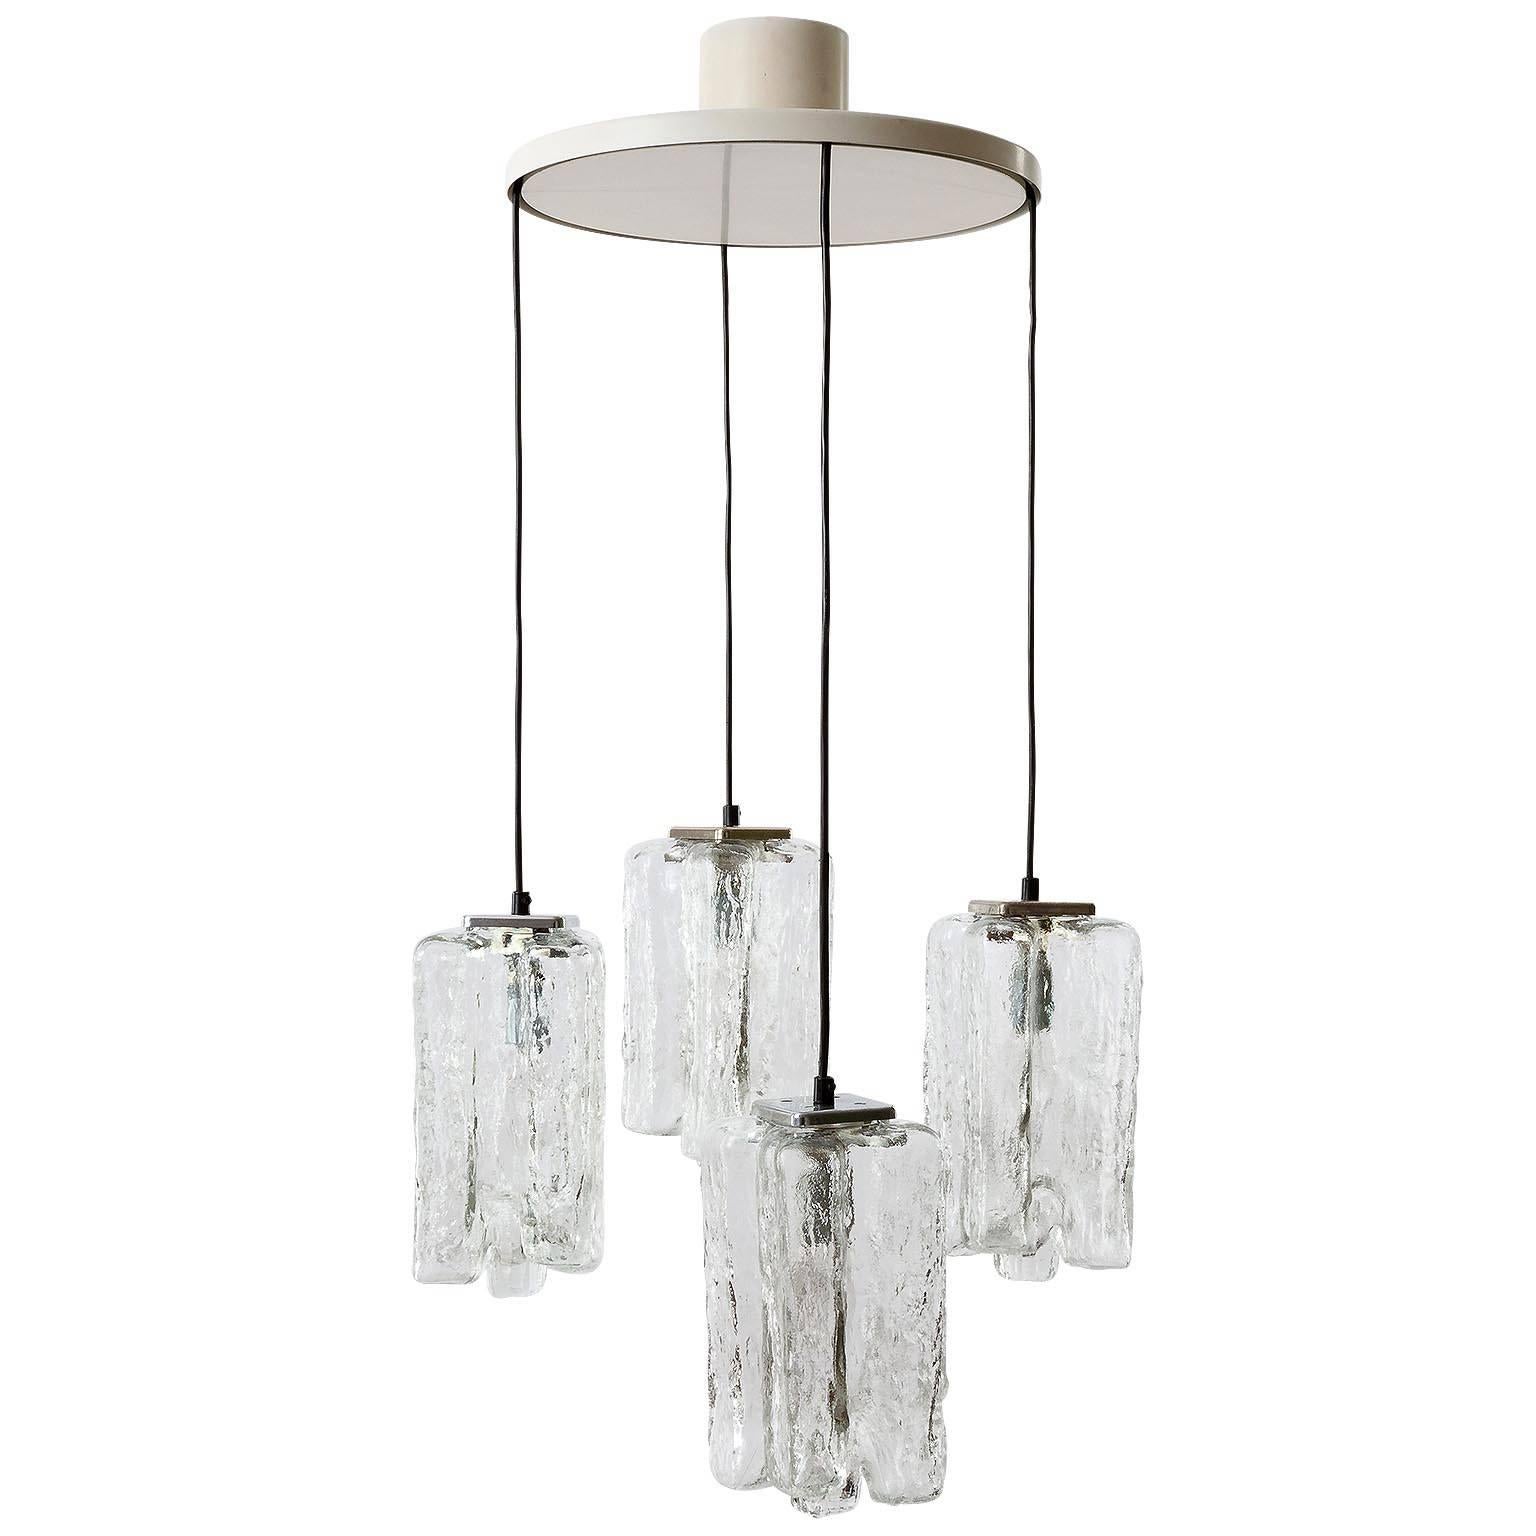 A hanging lamp by Kalmar, Austria, manufactured in Mid-Century, circa 1970 (late 1960s or early 1970s). It is made of four frosted ice glass lamp shades which are hanging on a white painted ceiling plate. The cords are adjustable in height.
Each